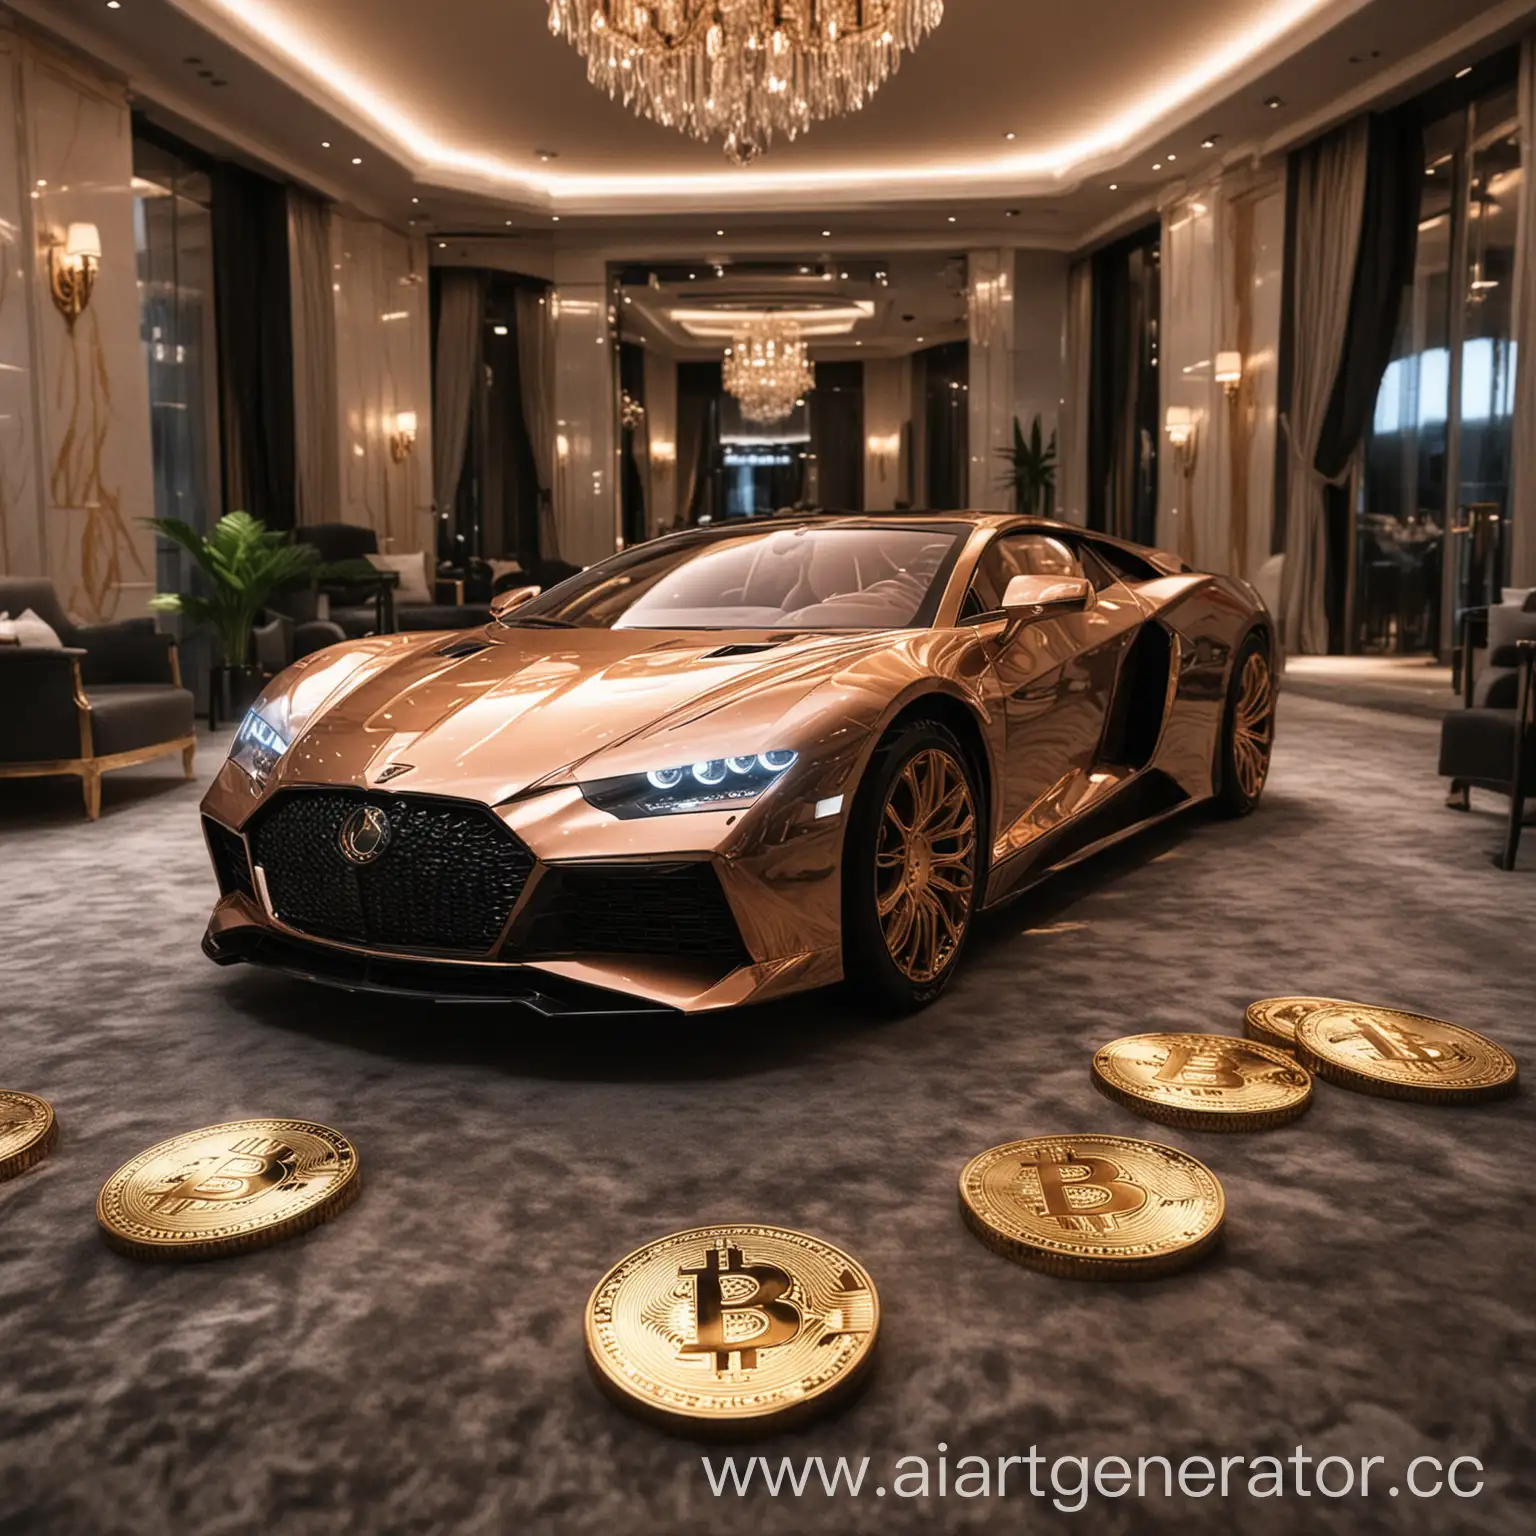 Luxurious-Lifestyle-with-Cryptocurrency-Opulent-Living-in-a-Digital-Age